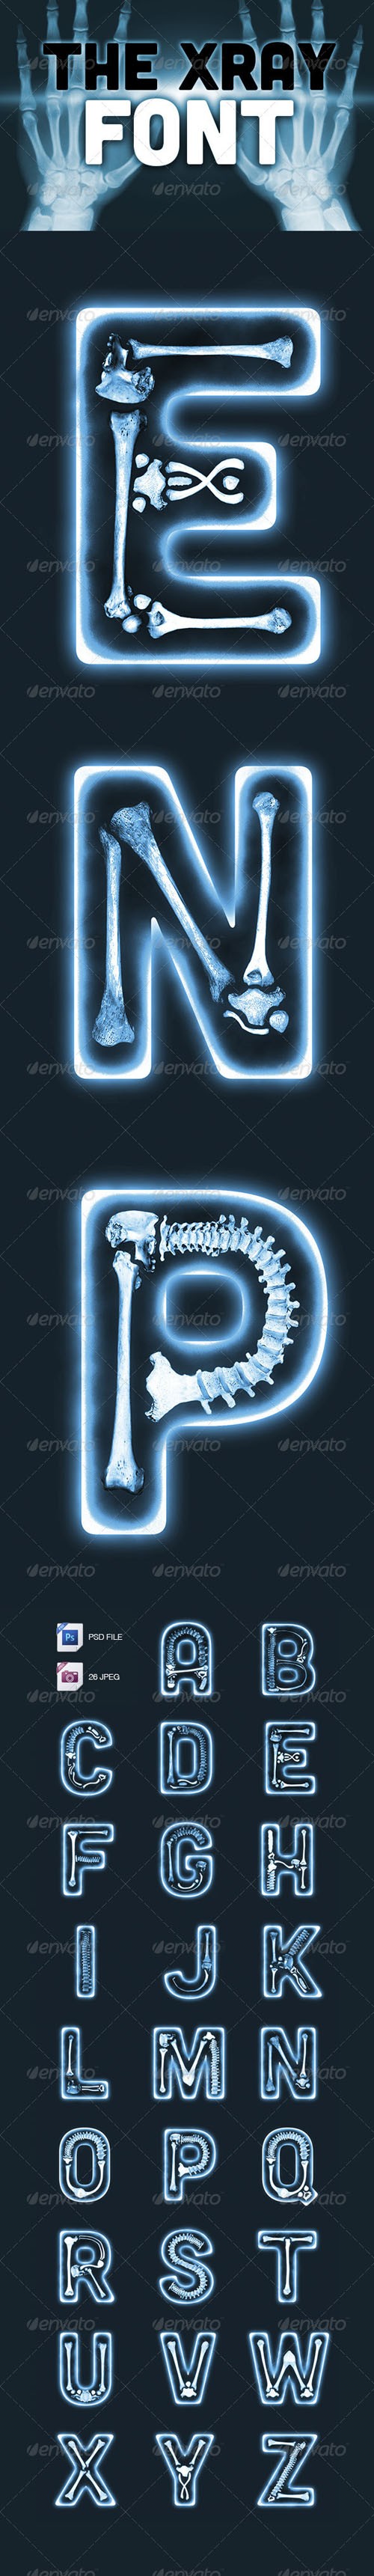 The X-Ray Font - GraphicRiver 2728990